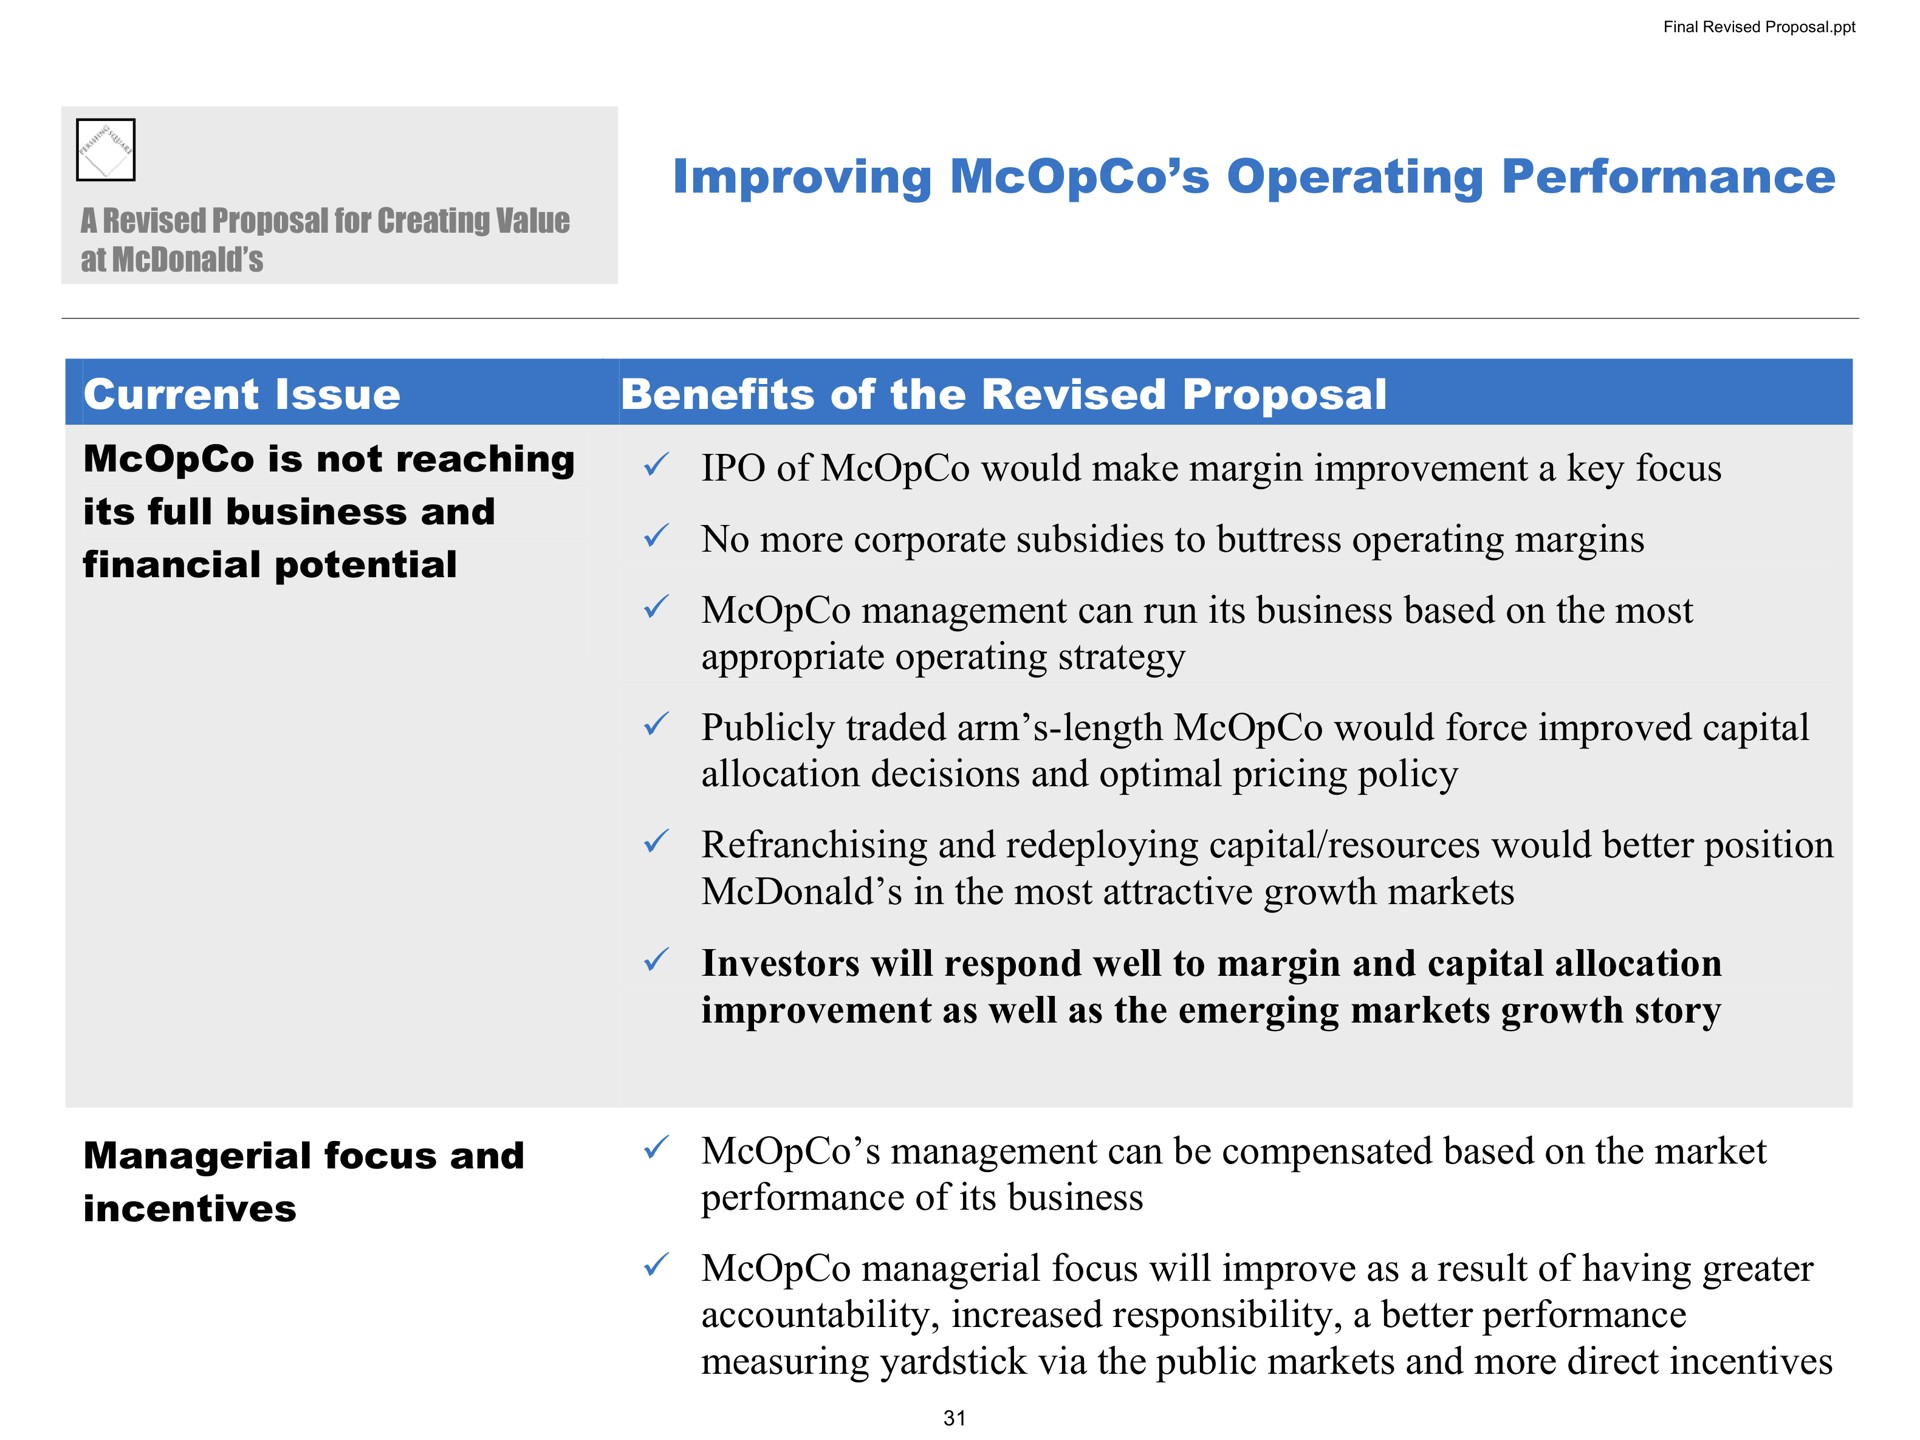 improving operating performance current issue benefits of the revised proposal is not reaching its full business and financial potential of would make margin improvement a key focus no more corporate subsidies to buttress operating margins management can run its business based on the most appropriate operating strategy publicly traded arm length would force improved capital allocation decisions and optimal pricing policy and redeploying capital resources would better position in the most attractive growth markets investors will respond well to margin and capital allocation improvement as well as the emerging markets growth story managerial focus and incentives management can be compensated based on the market performance of its business managerial focus will improve as a result of having greater accountability increased responsibility a better performance measuring yardstick via the public markets and more direct incentives | Pershing Square